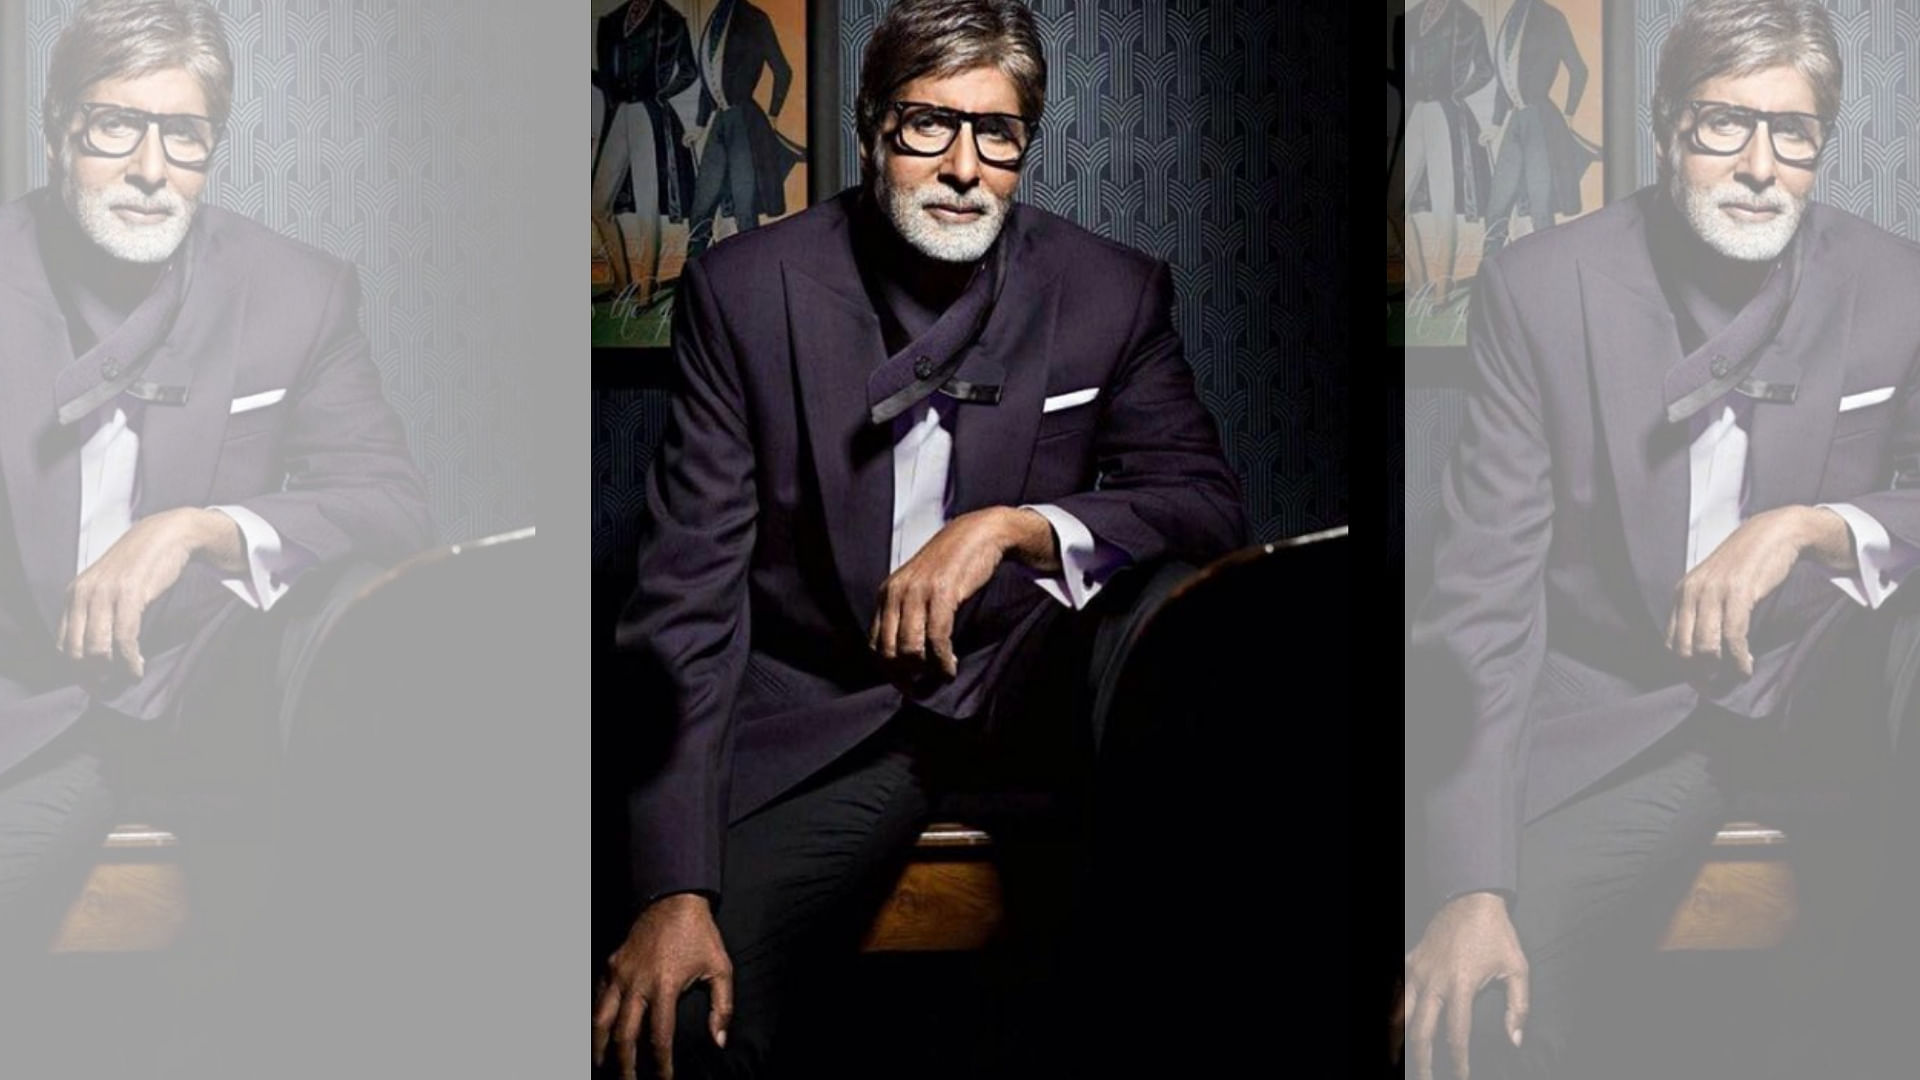 After Maharashtra, megastar Amitabh Bachchan will pay off loans of farmers in Uttar Pradesh and will personally meet some of them to give them their bank letters. 